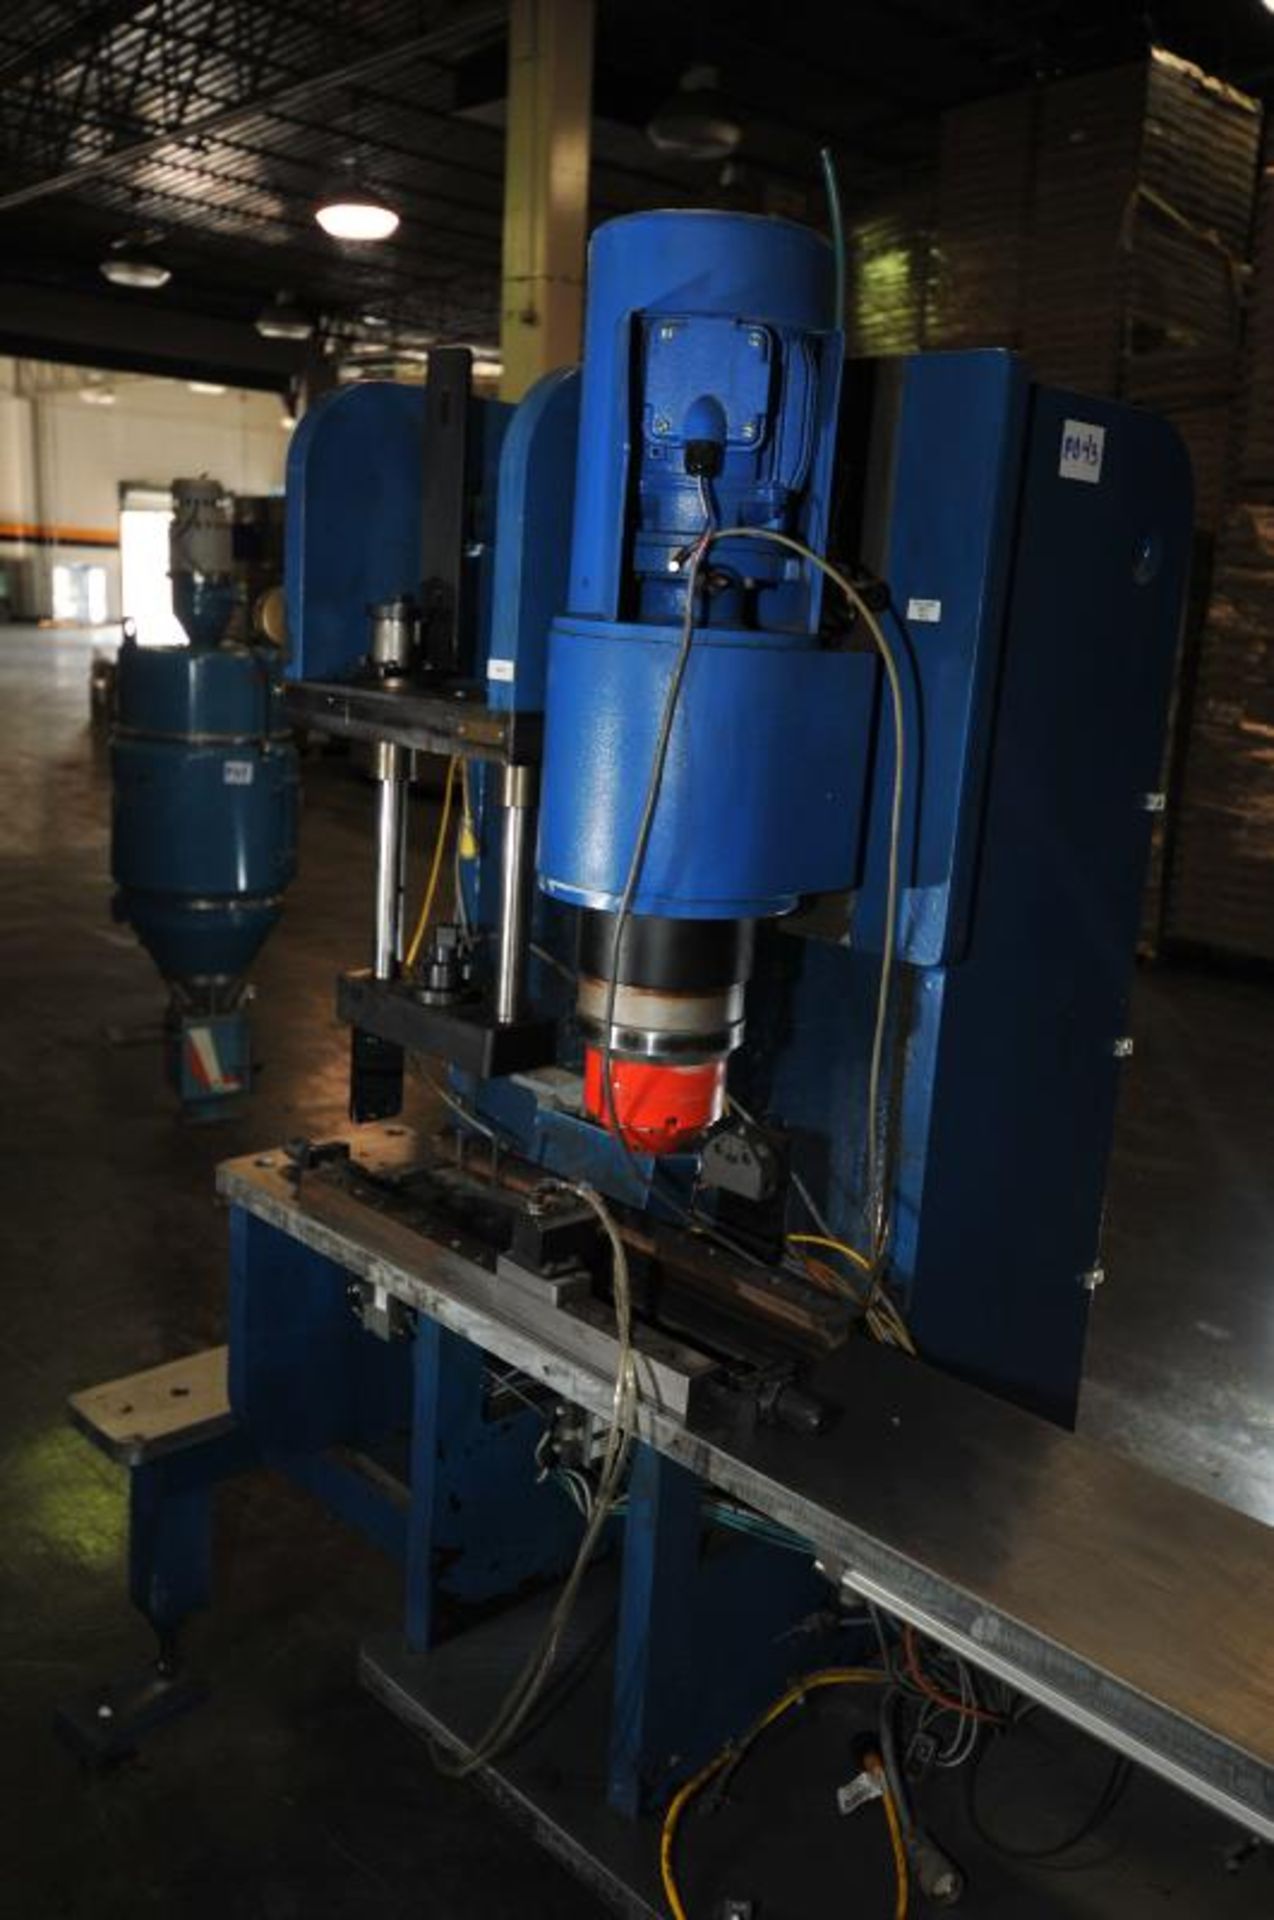 workstation for Industrial Riveter, brand: inovative automation, condition: spare parts. Location: - Image 10 of 11